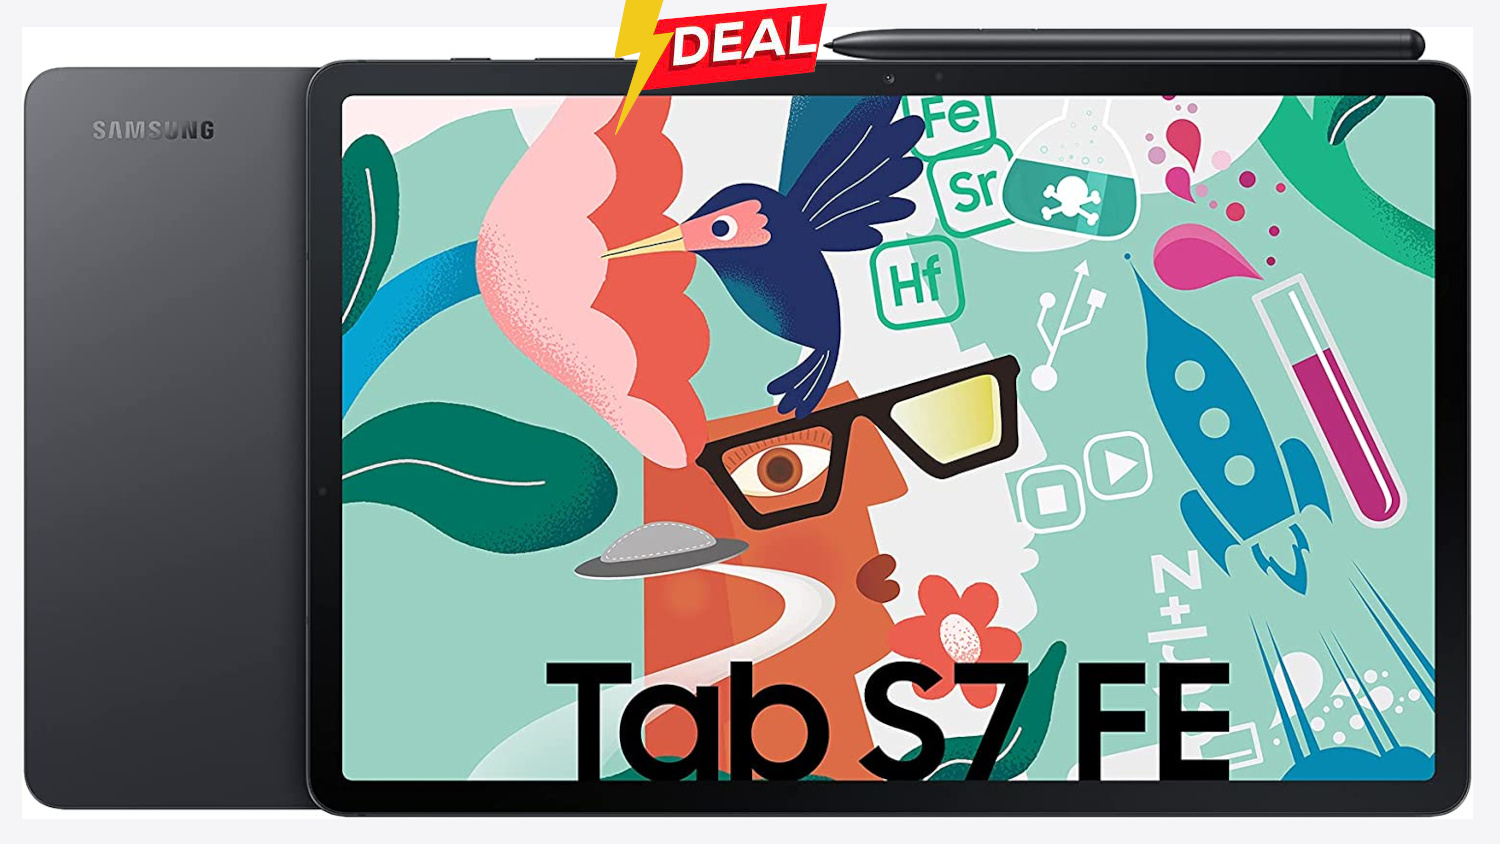 Offer: 12.4-inch Samsung Galaxy Tab S7 FE WiFi Tablet with S Pen for only €399